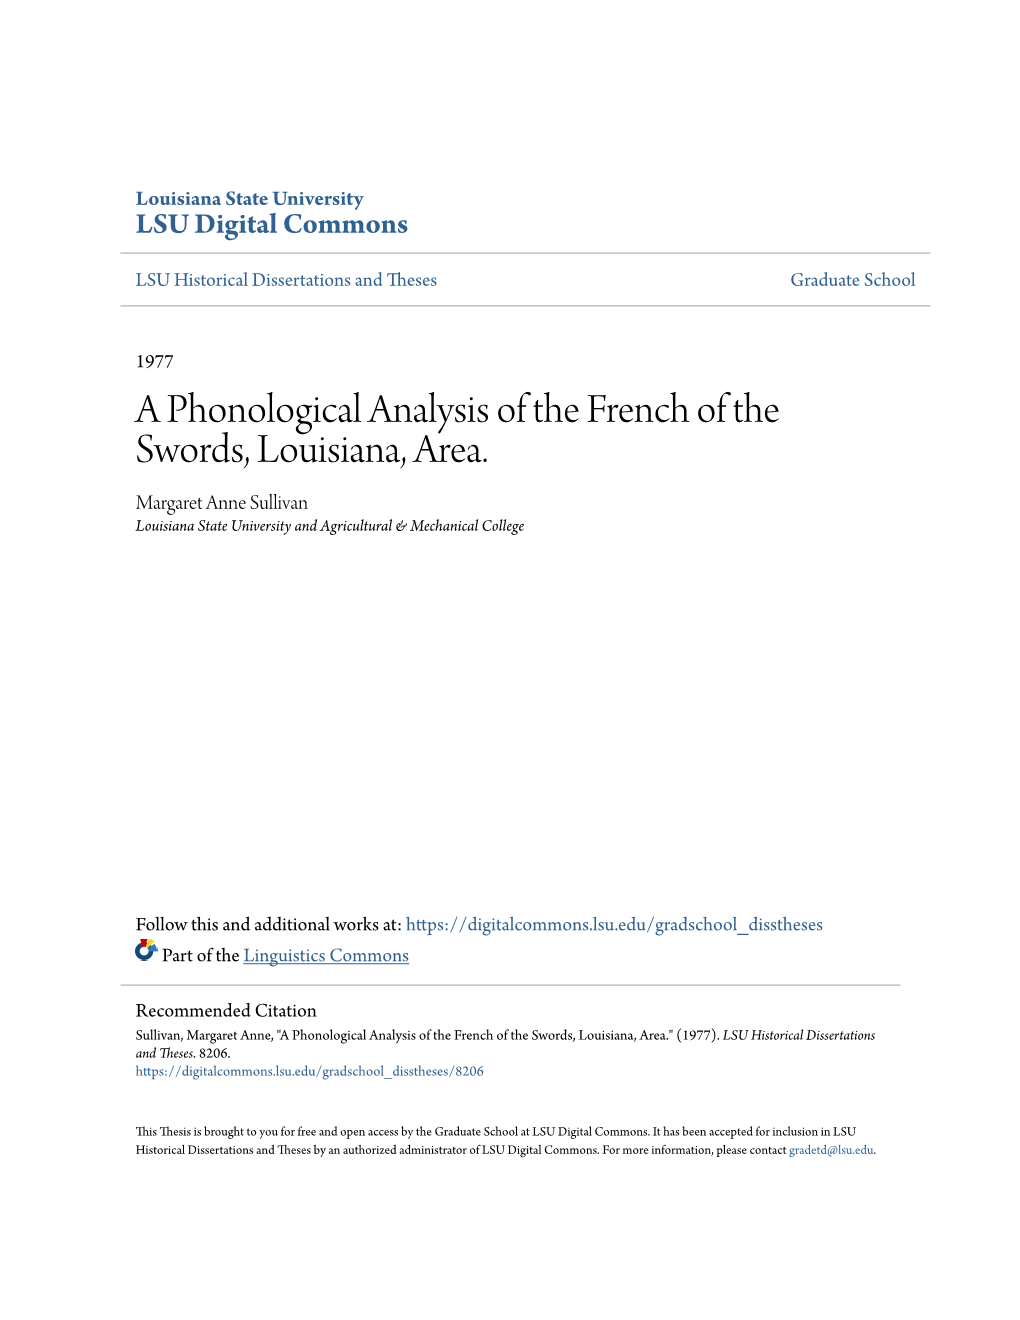 A Phonological Analysis of the French of the Swords, Louisiana, Area. Margaret Anne Sullivan Louisiana State University and Agricultural & Mechanical College